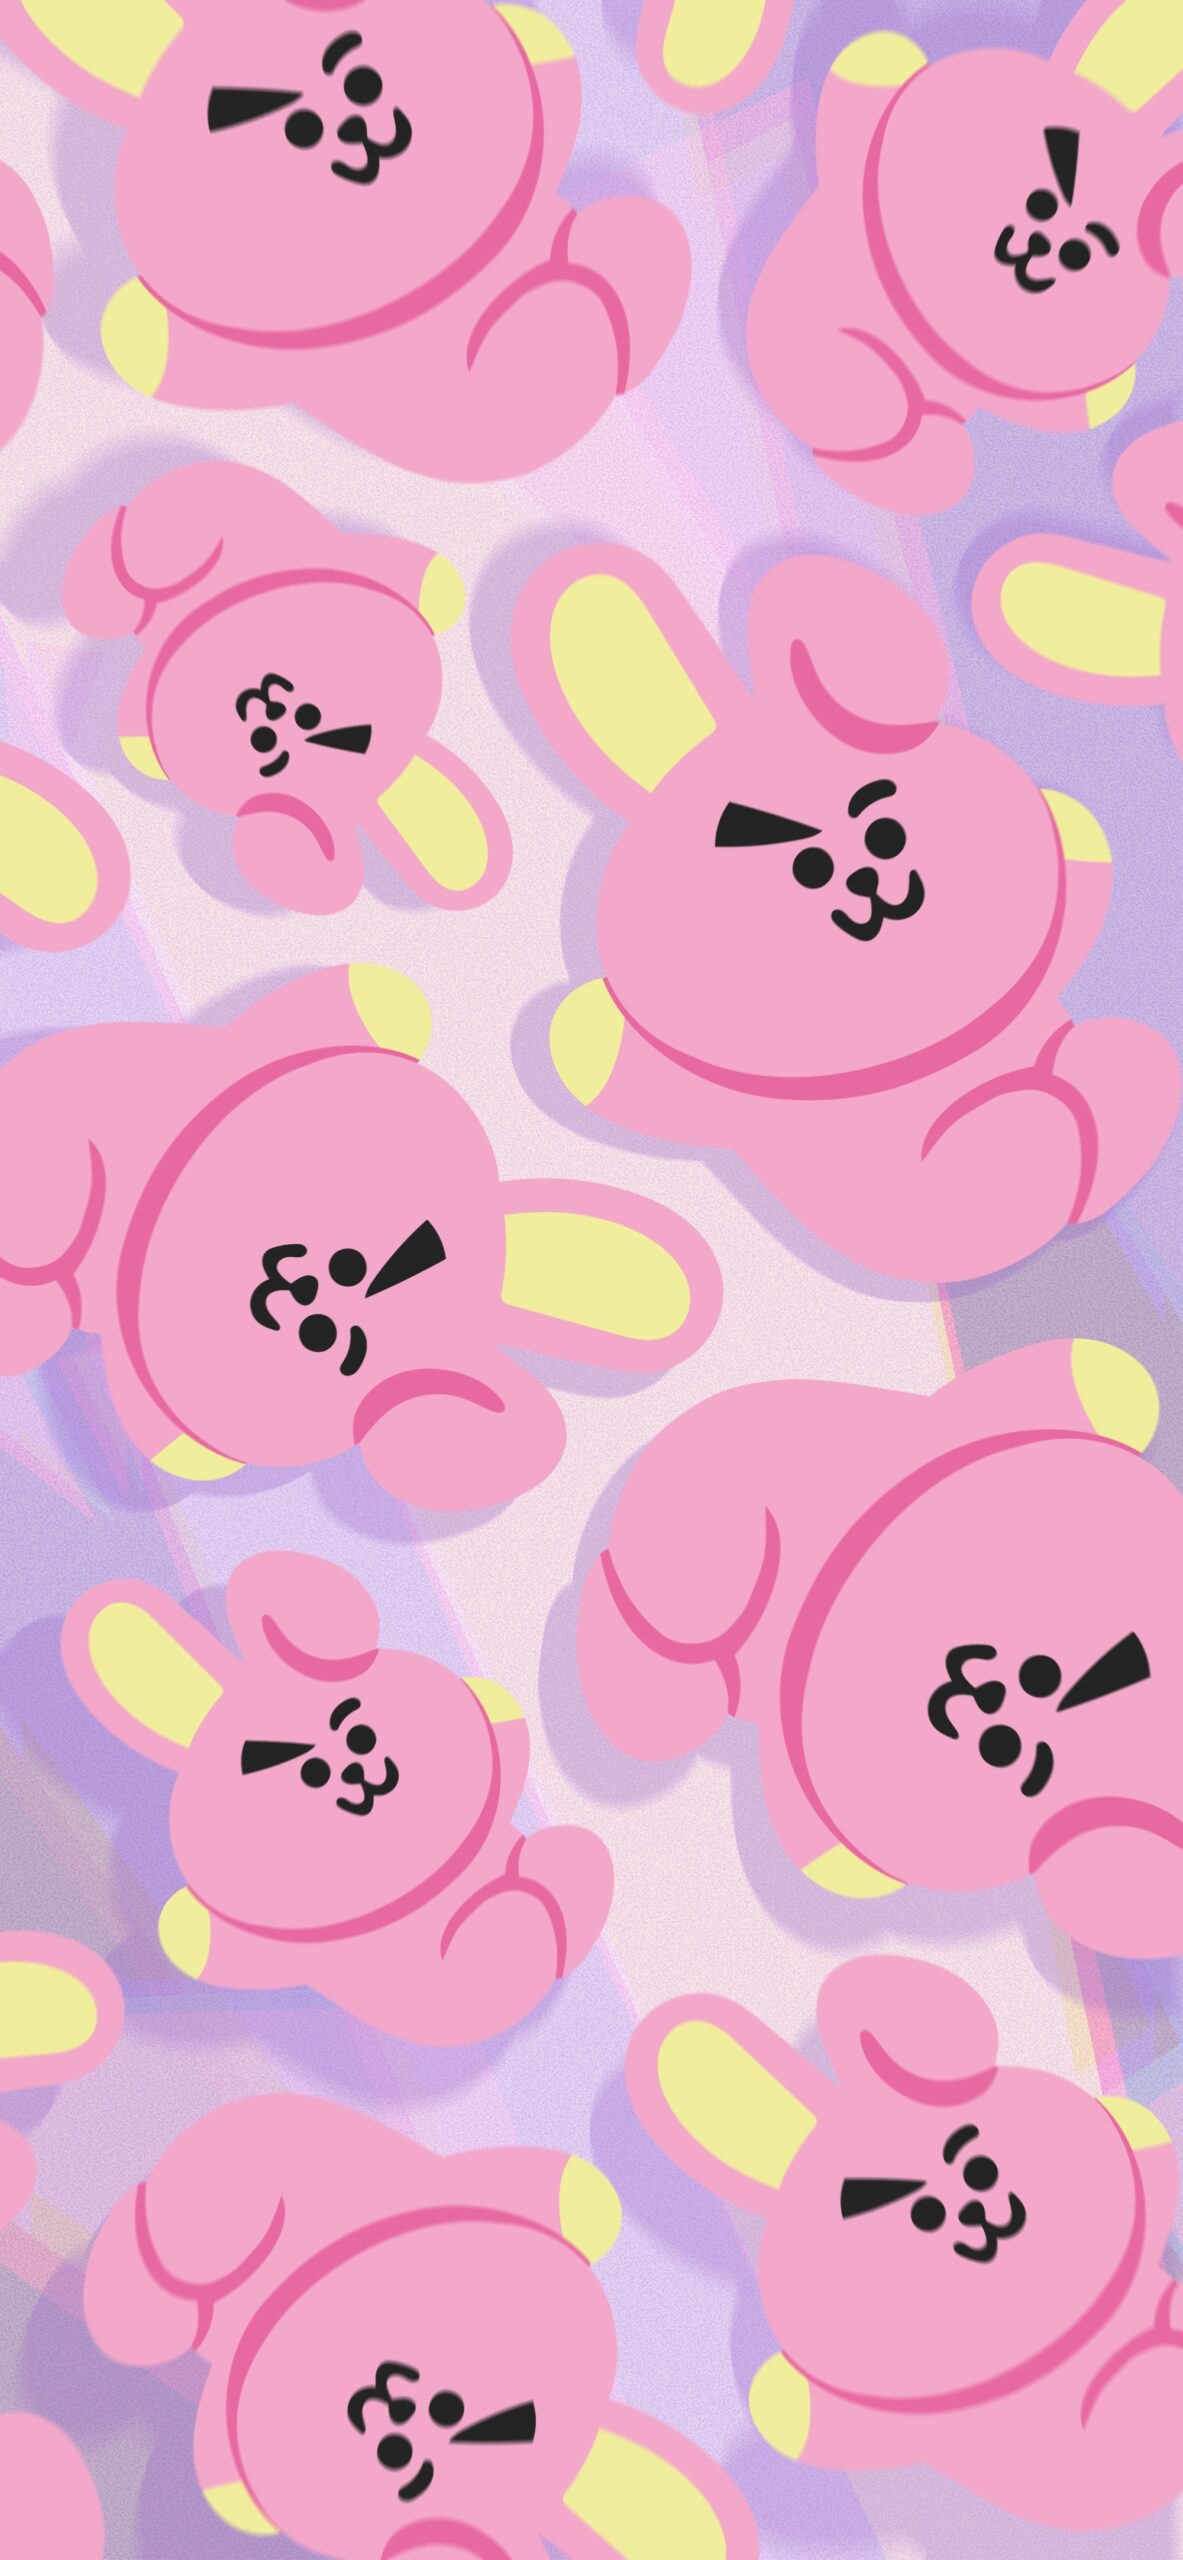 Bts bt cooky abstract wallpapers